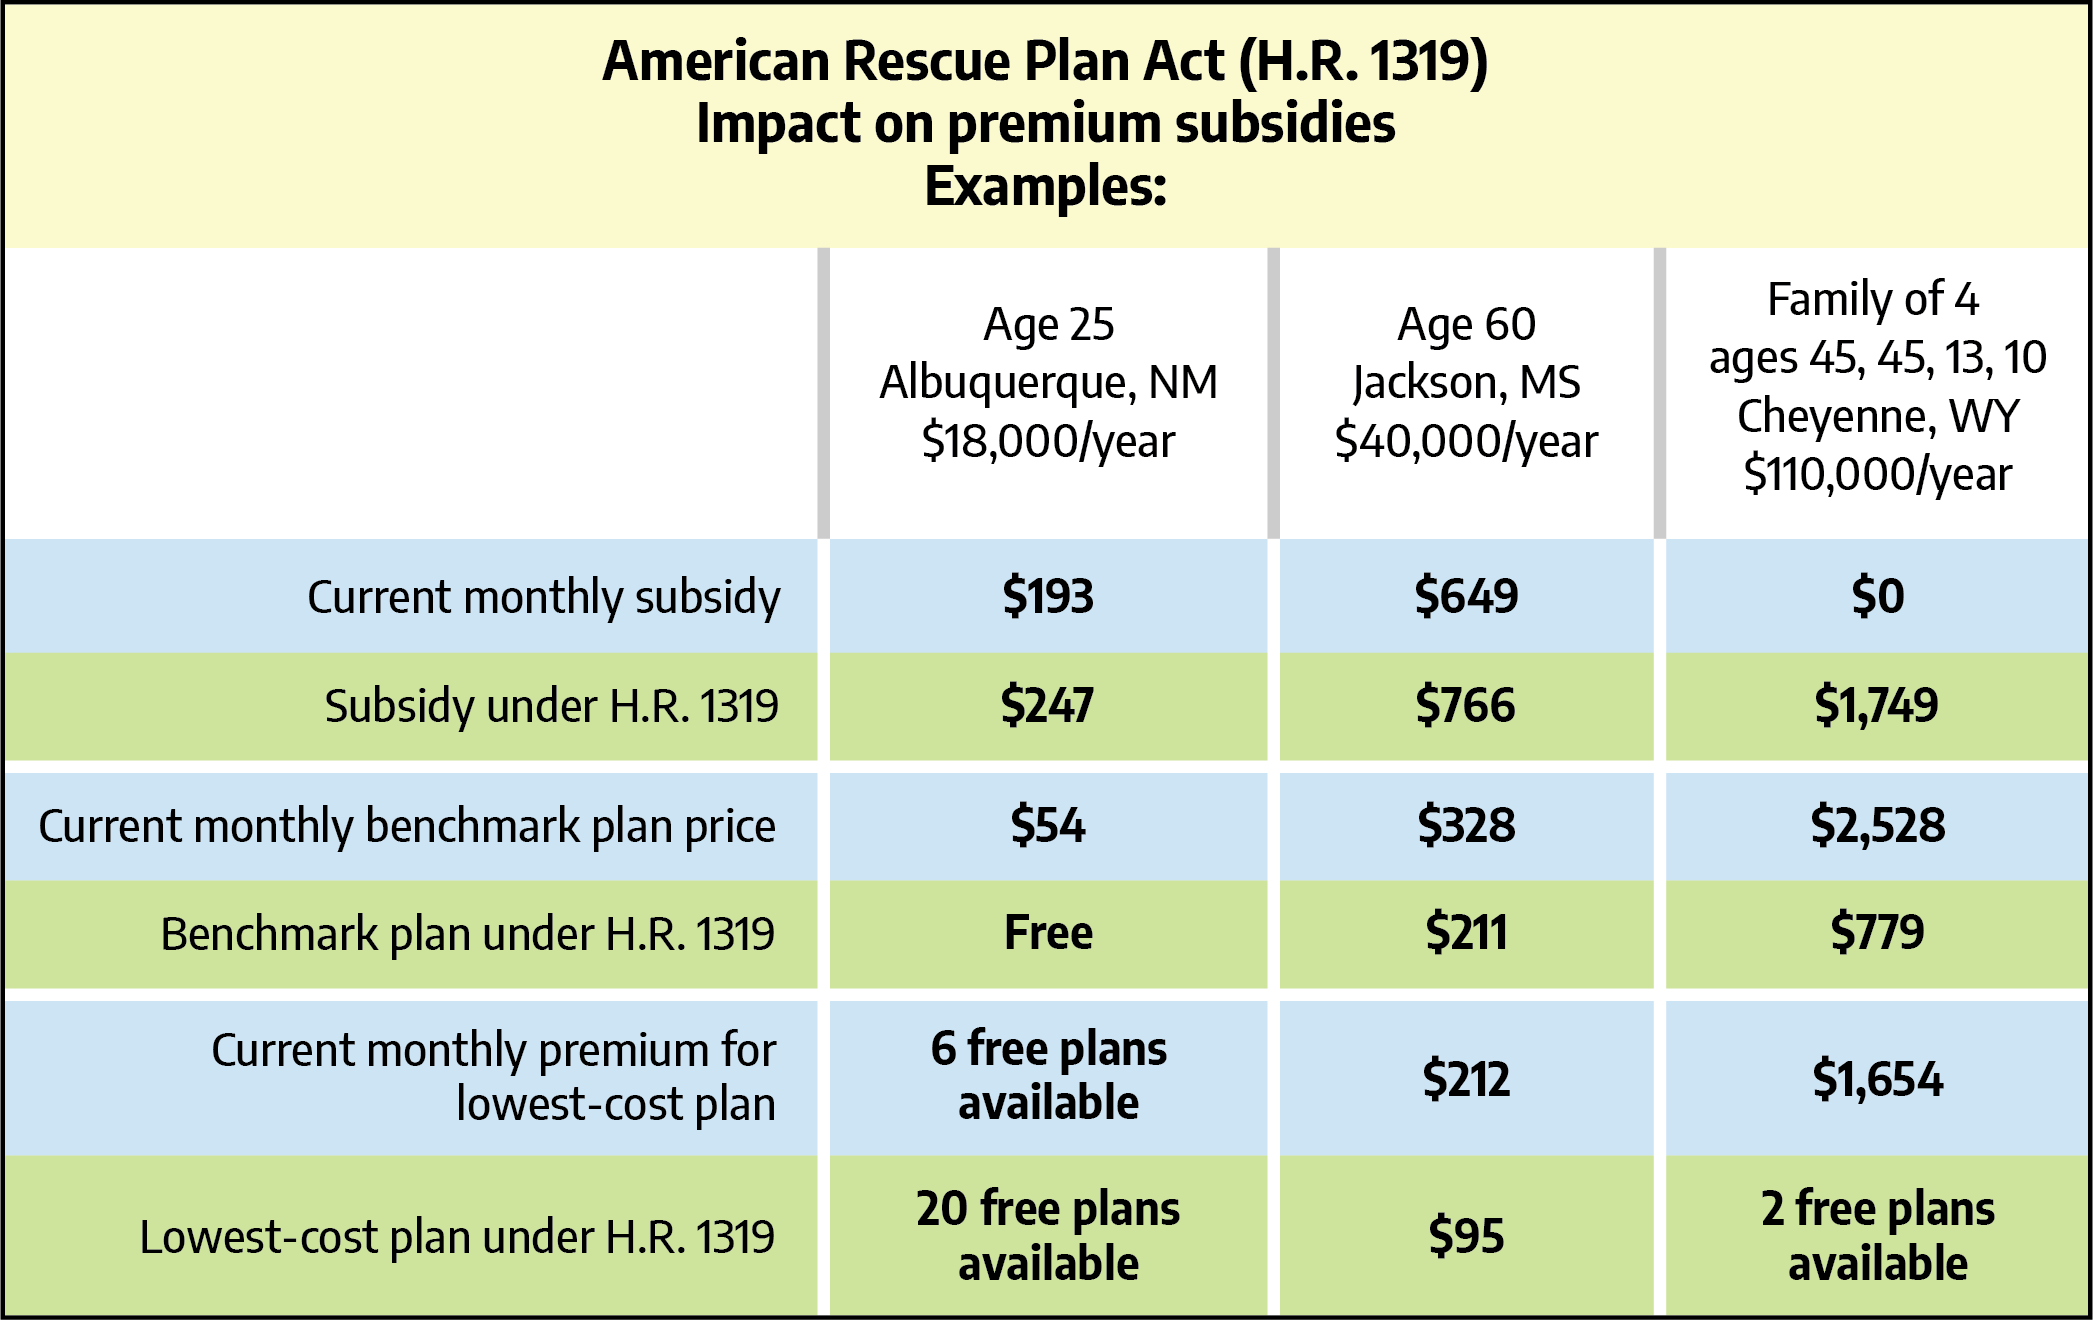 How the American Rescue Plan Act will boost marketplace premium